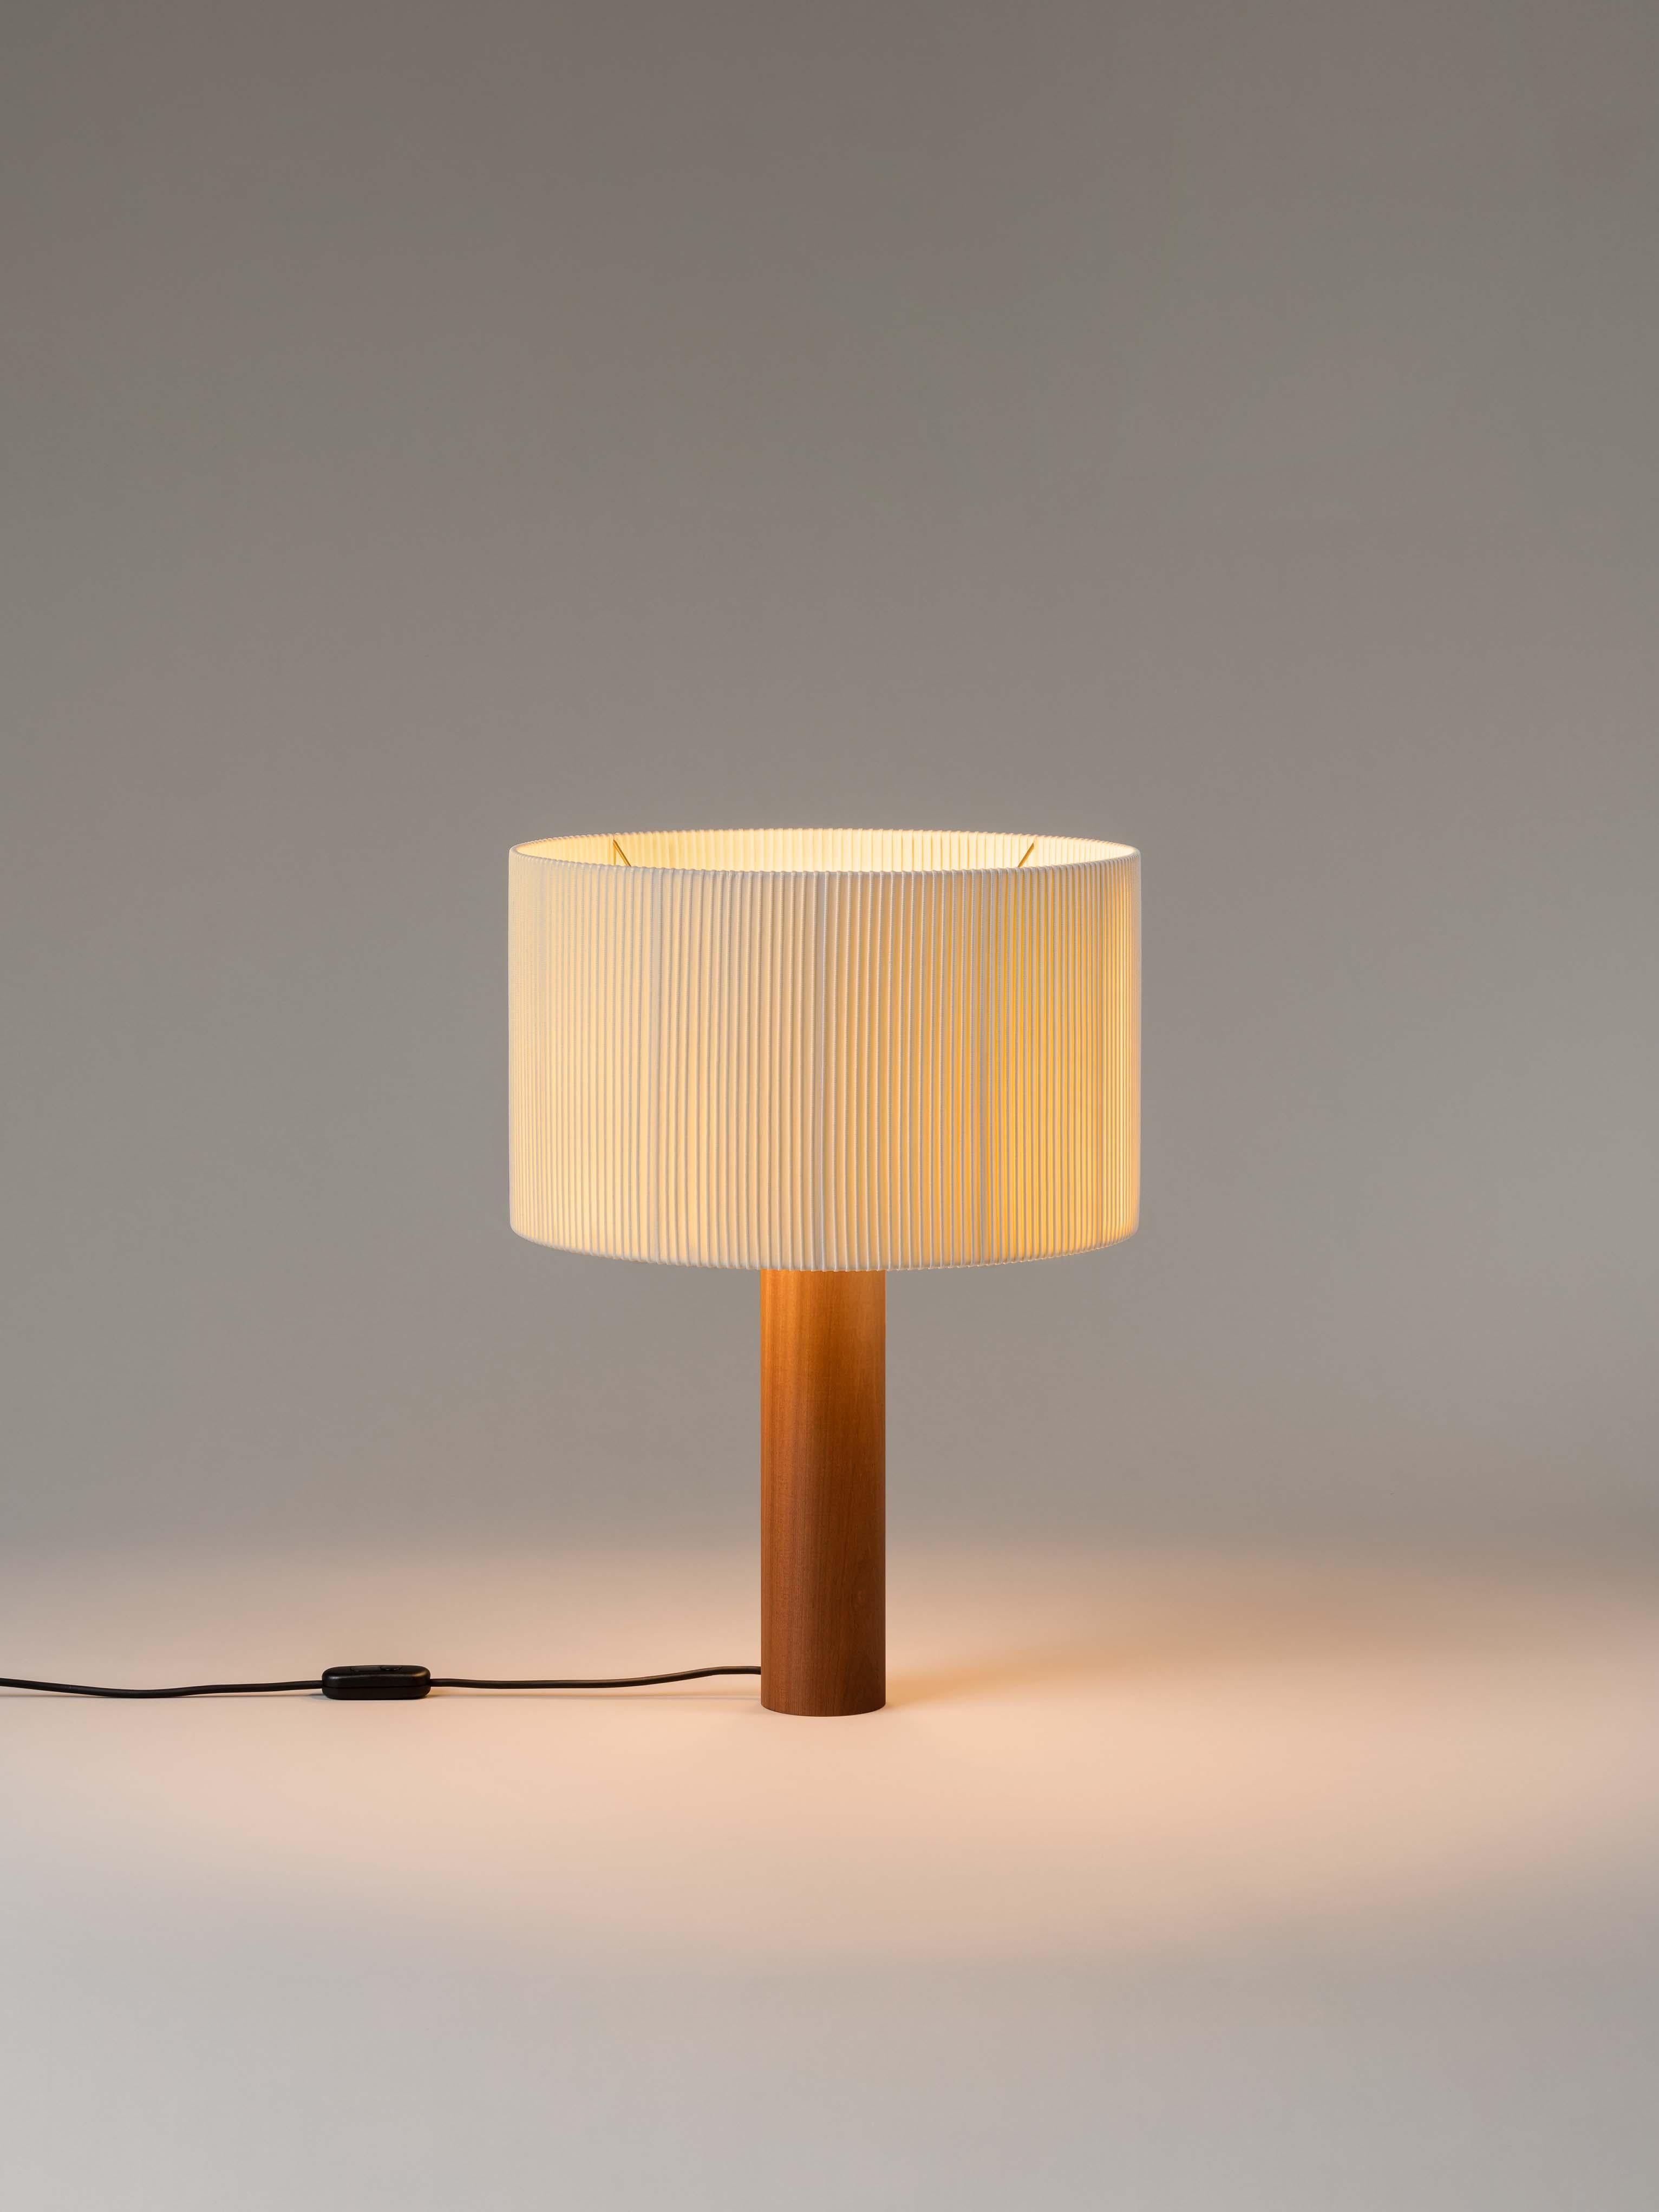 Sapeli moragas table lamp by Antoni de Moragas Gallissà
Dimensions: D 45 x H 62 cm
Materials: Sapeli wood.
Available in sapeli or oak wood.

A sturdy wooden cylinder supports a head with three bulbs, surrounded by a generous circular shade. The